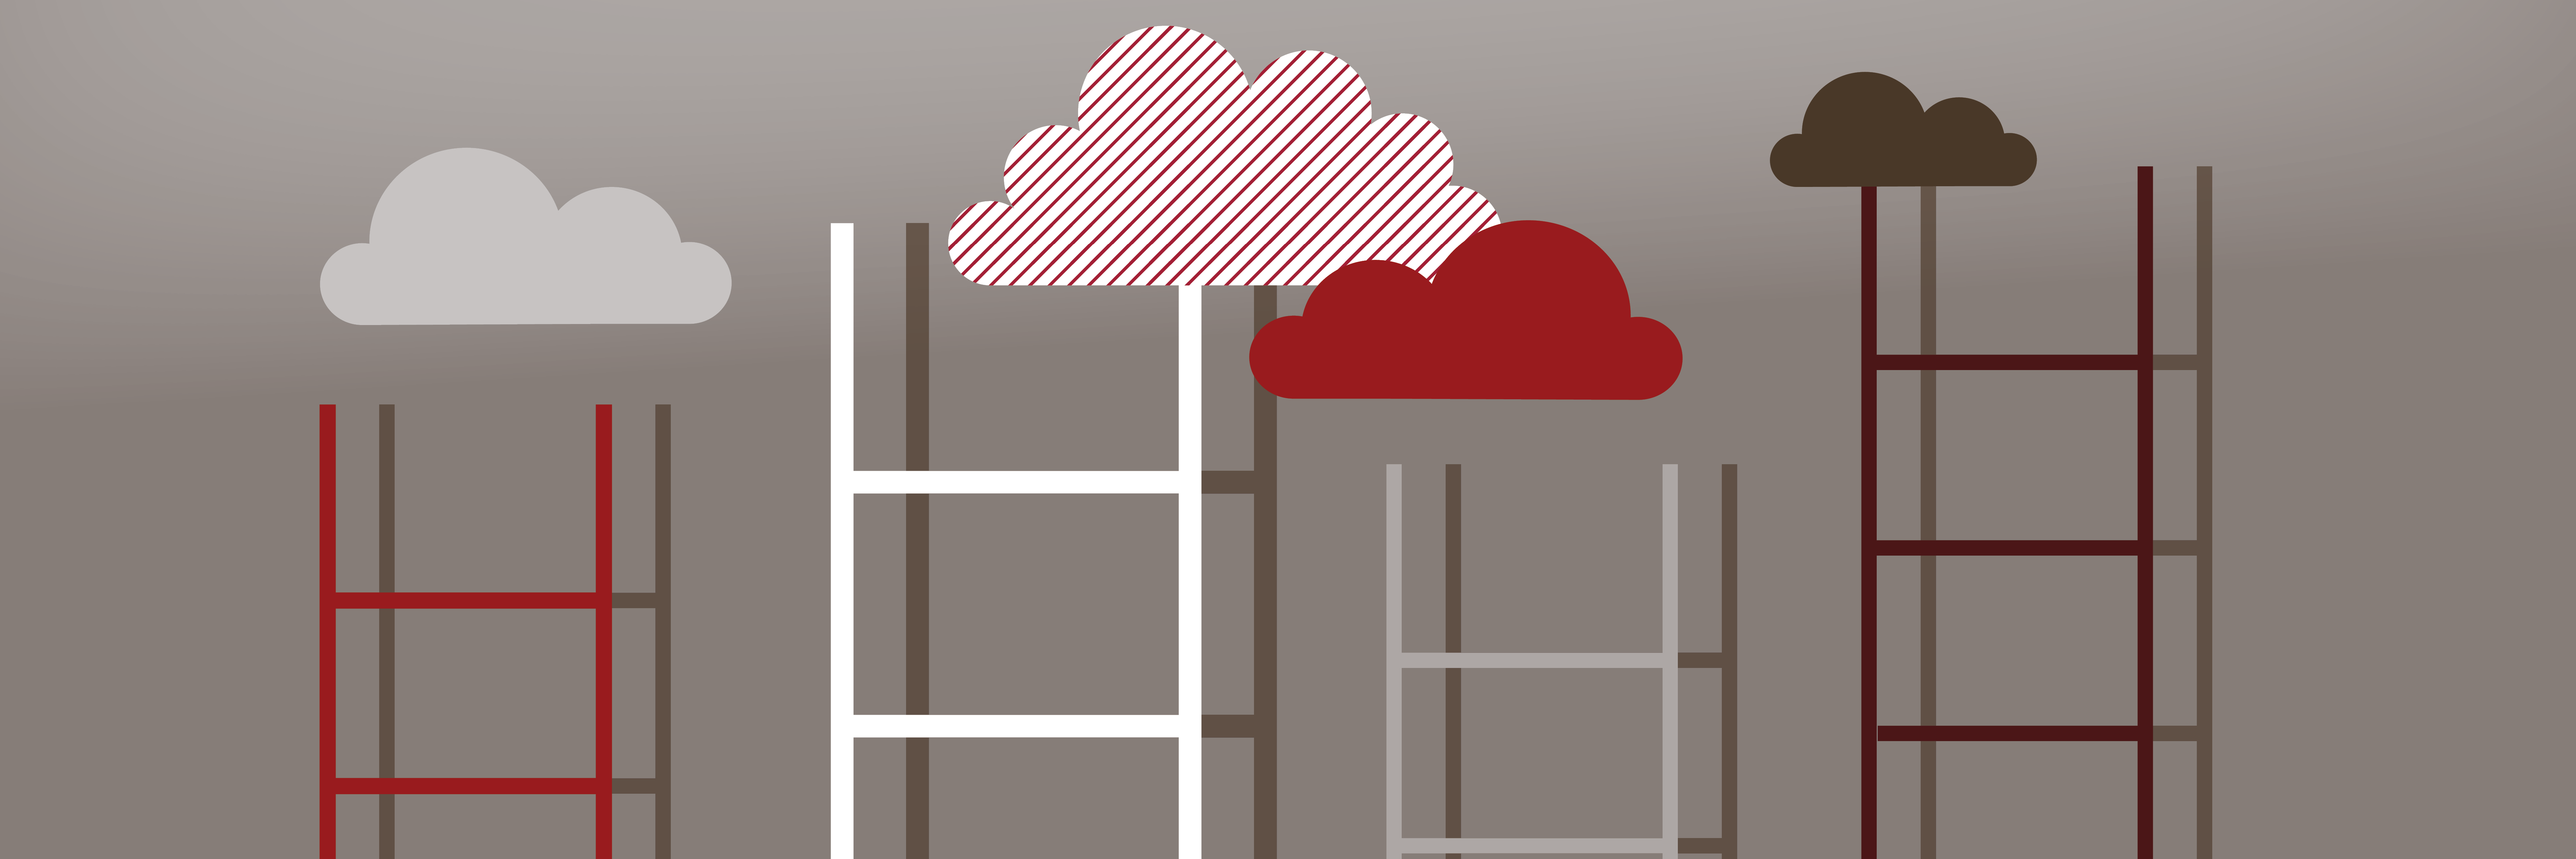 Graphic with ladders and clouds.